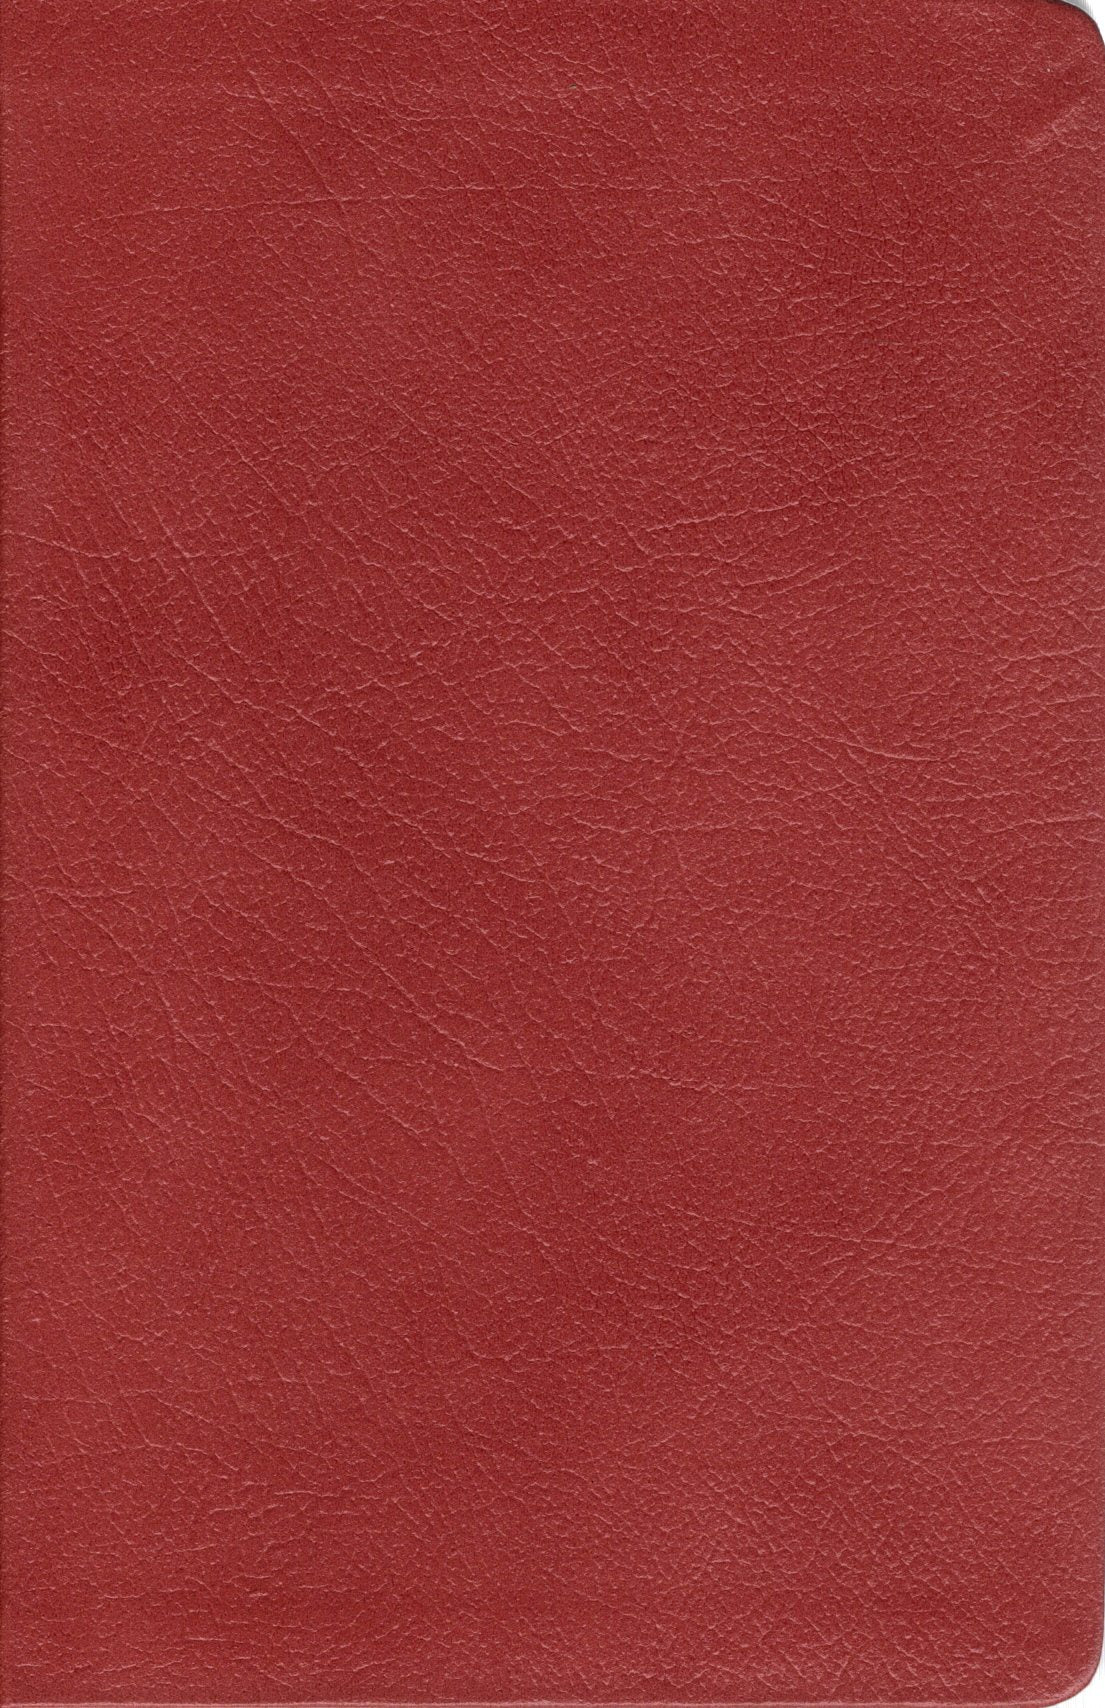 Stonehaven Press KJV 1917 Scofield Reference Edition Bible, Edited by Rev. C.I. Scofield, D.D. - Bonded Leather